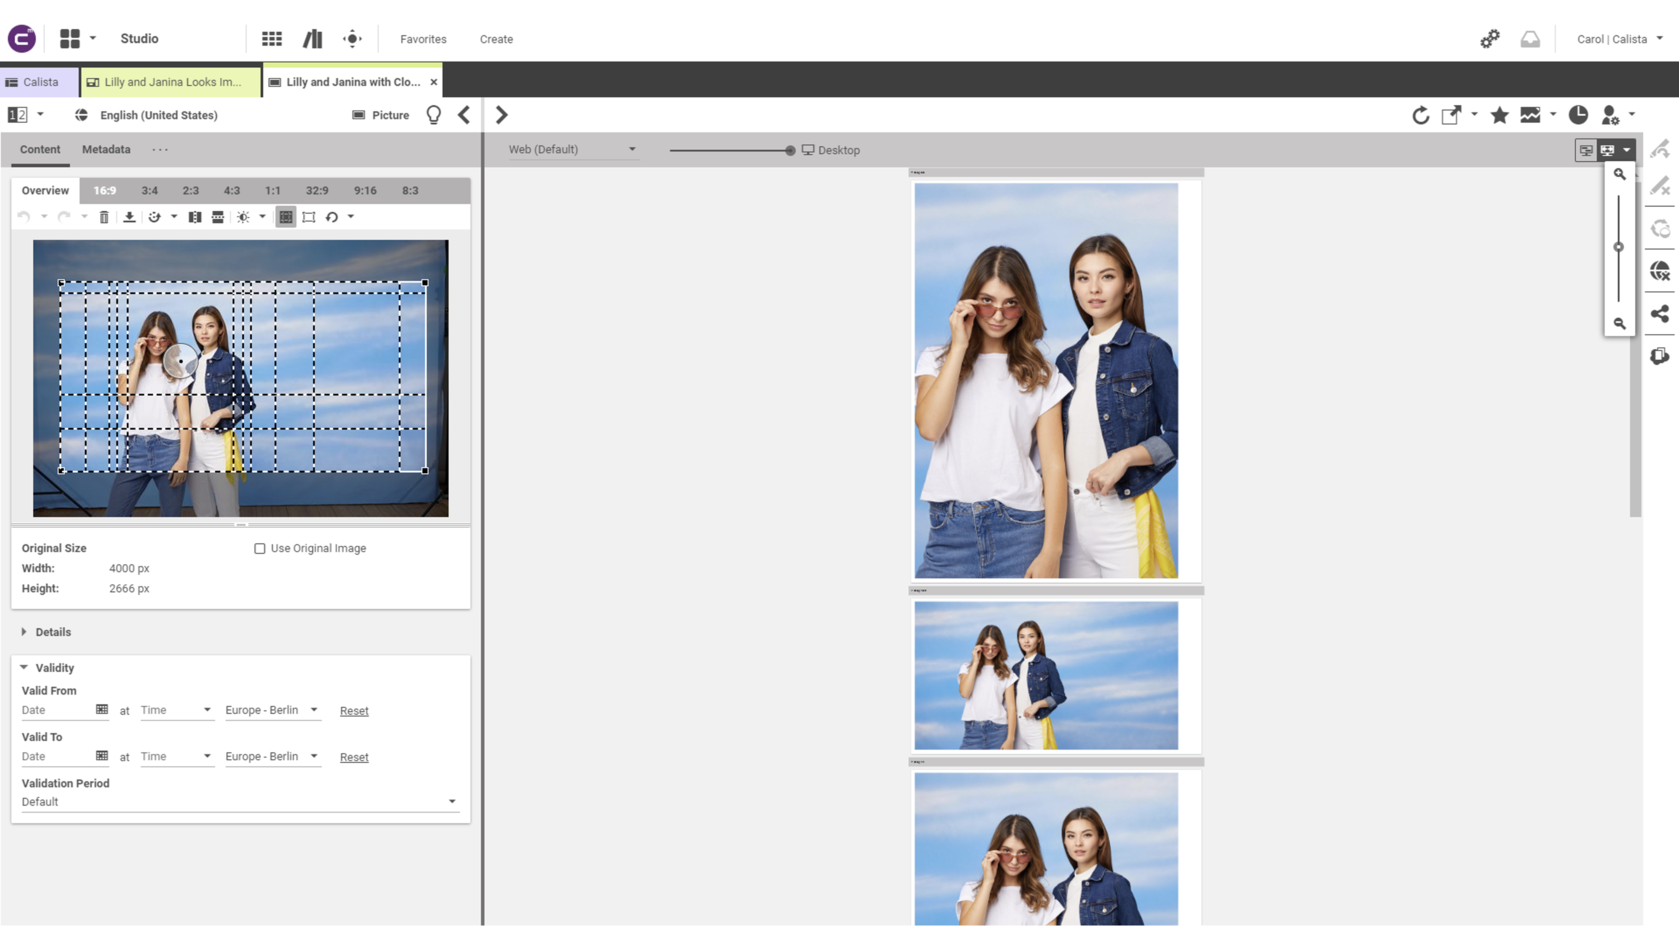 Automated Image Cropping in Studio